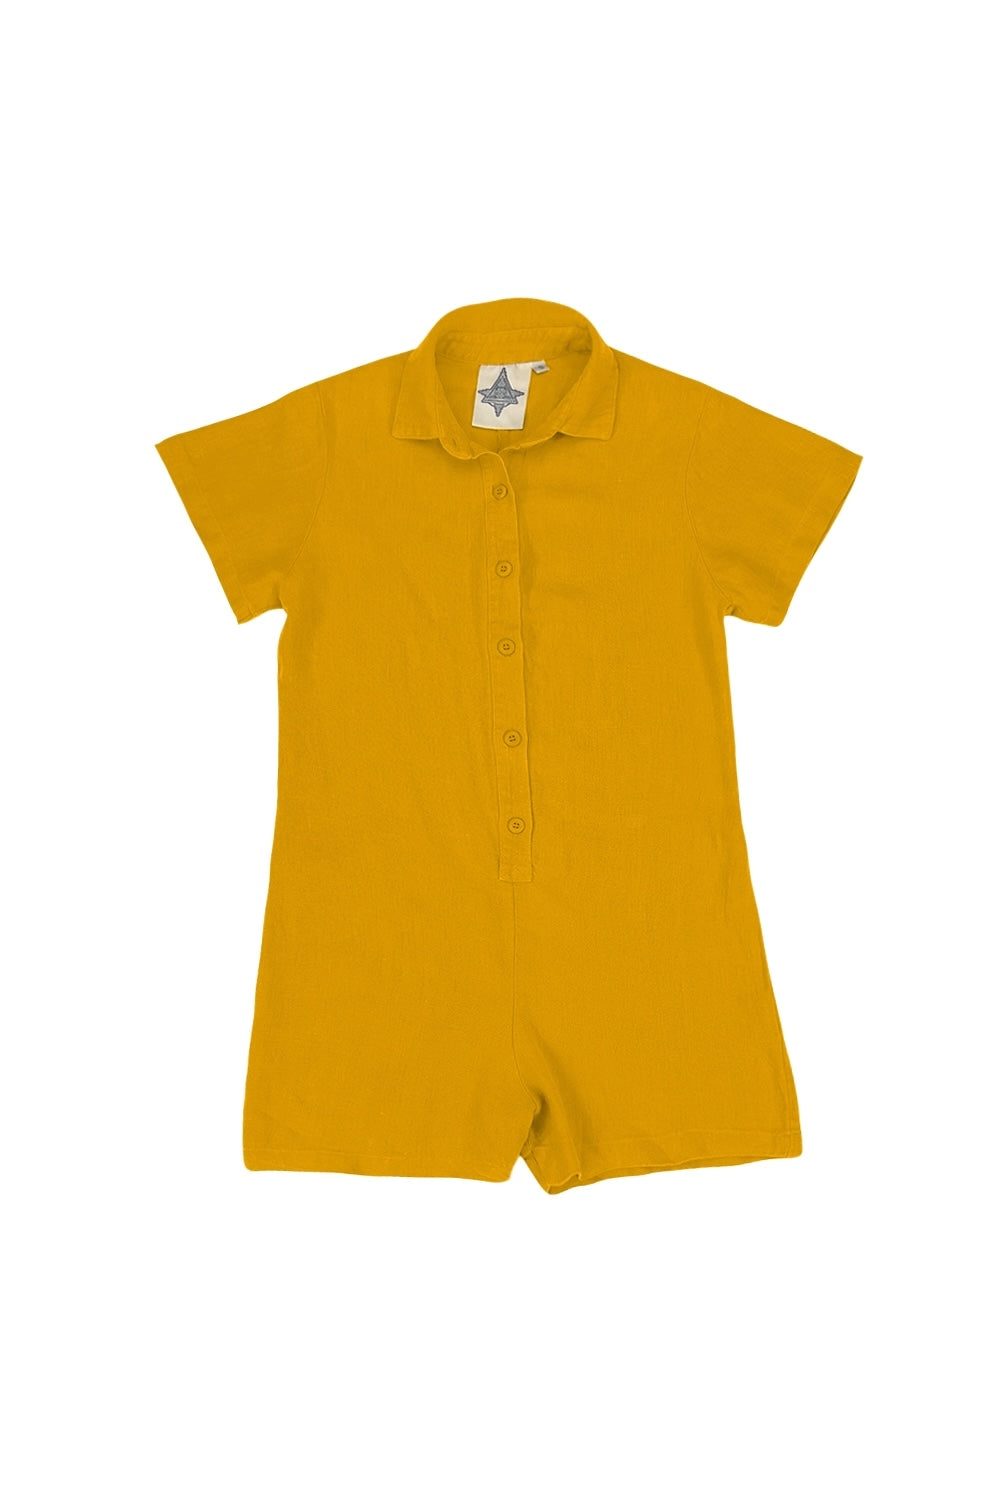 Stillwater Polo Romper | Jungmaven Hemp Clothing & Accessories / Color: Spicy Mustard